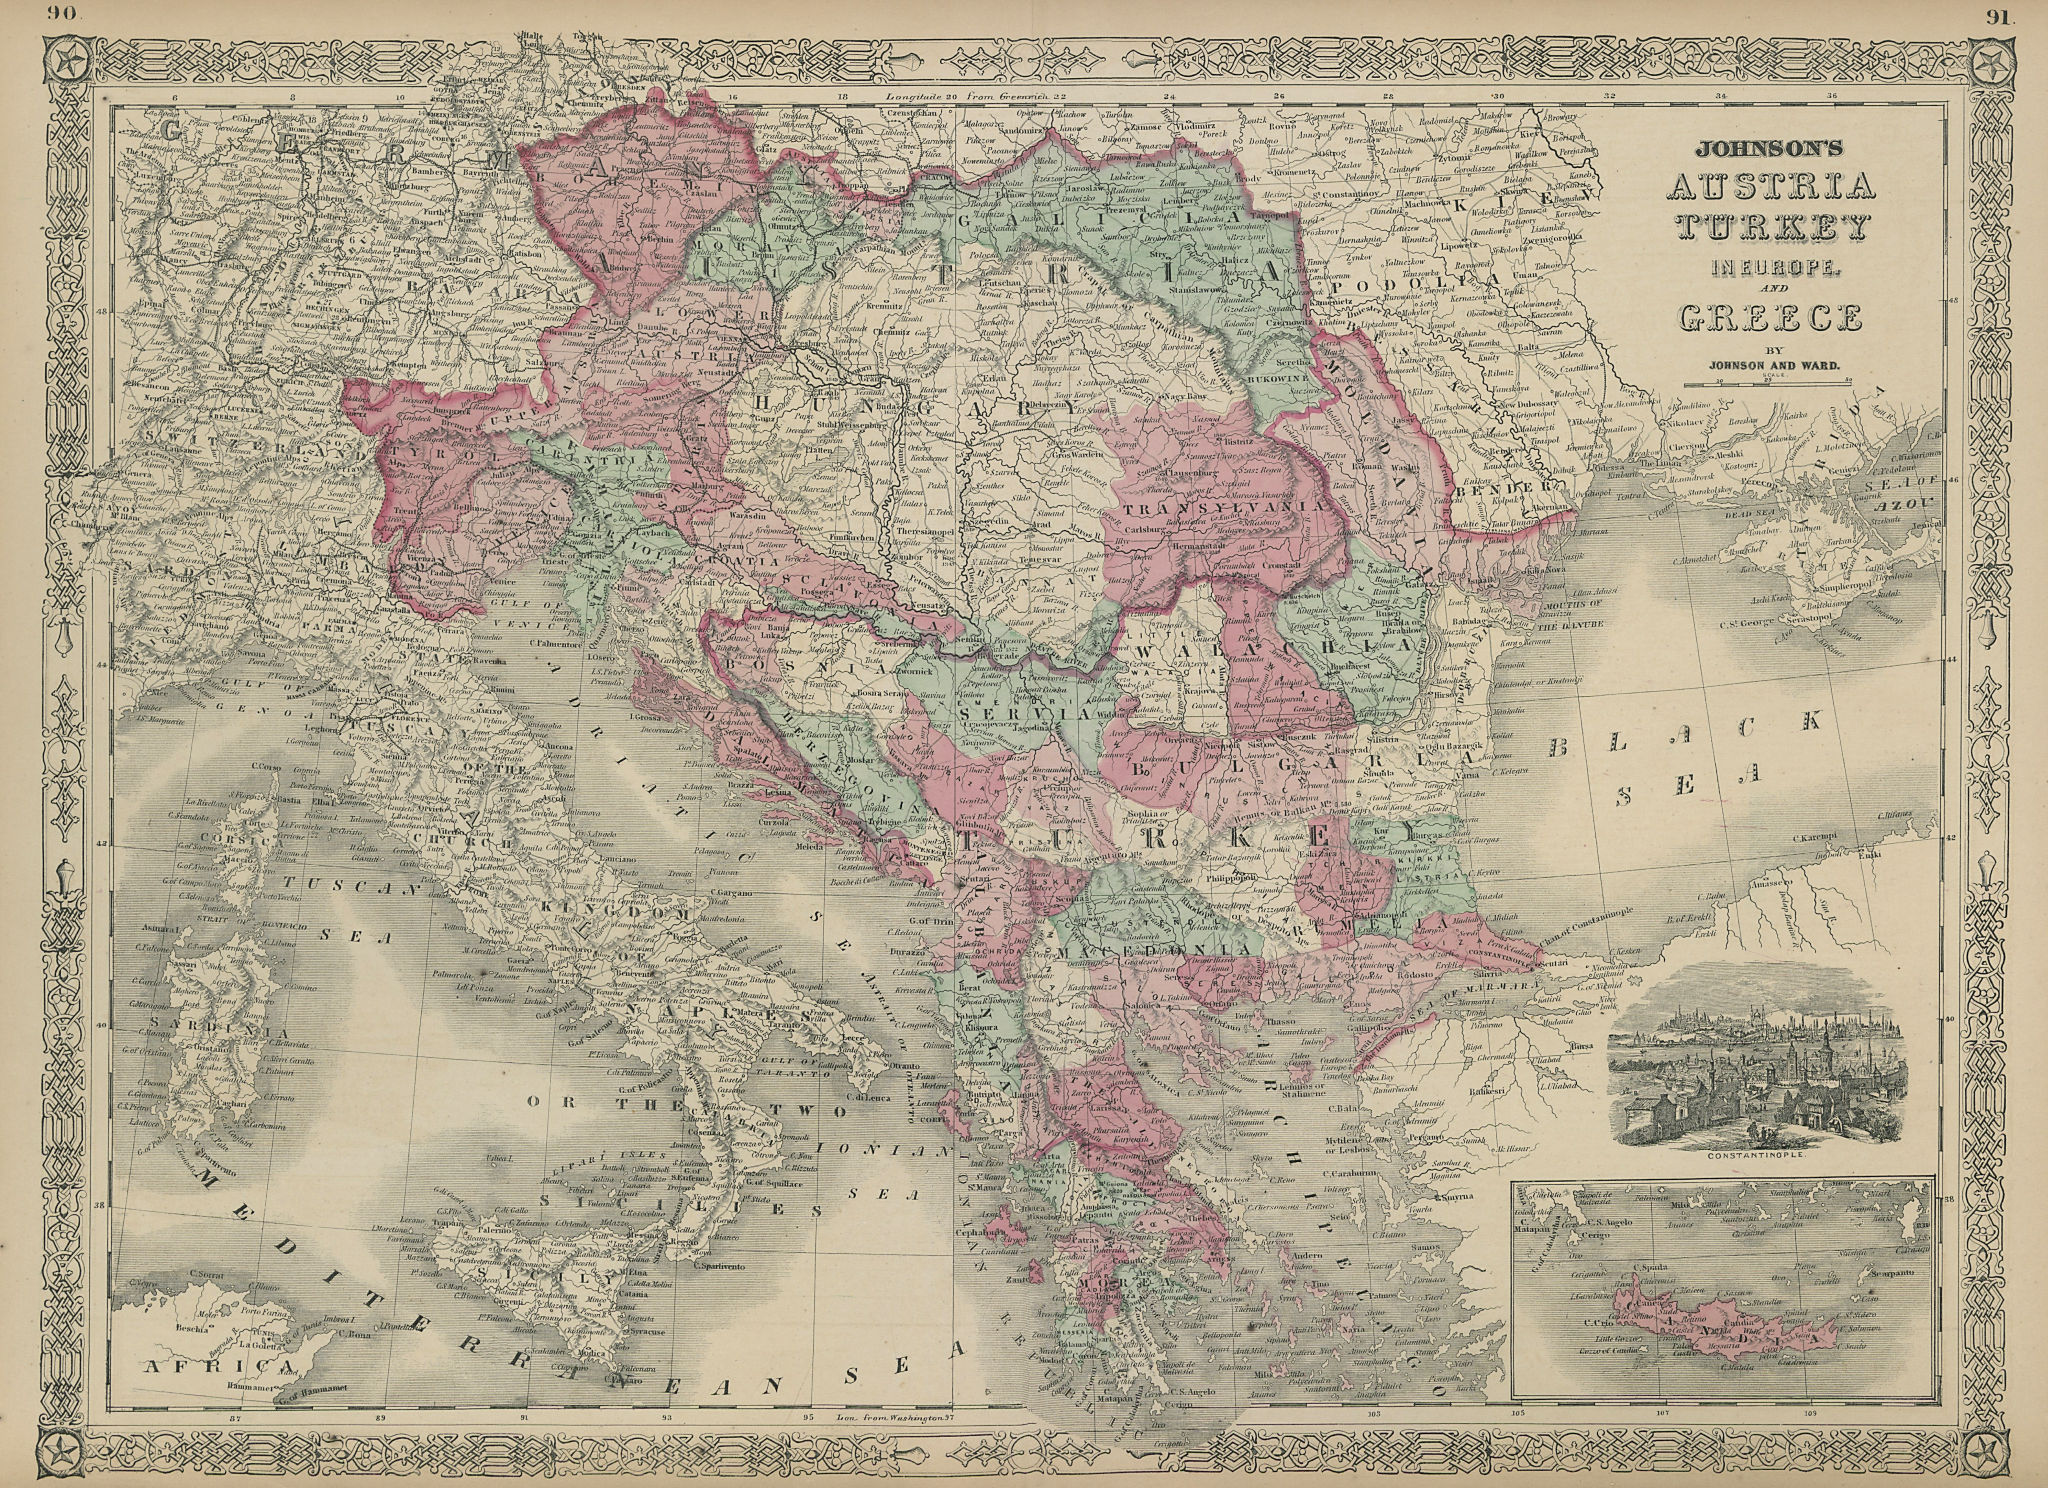 Associate Product Johnson's Austria, Turkey in Europe and Greece. Balkans 1865 old antique map